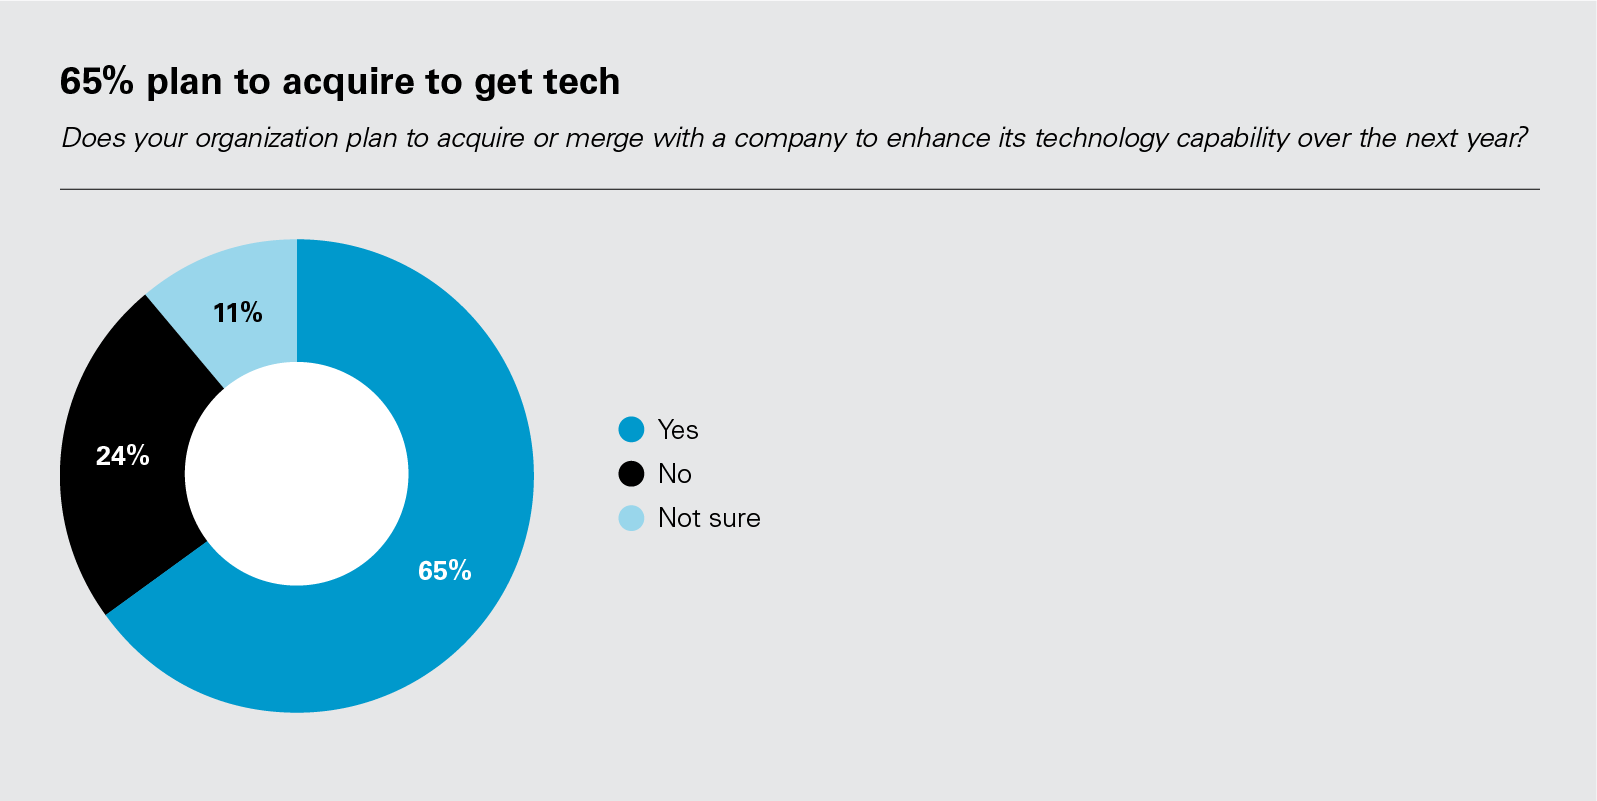 65% plan to acquire to get tech